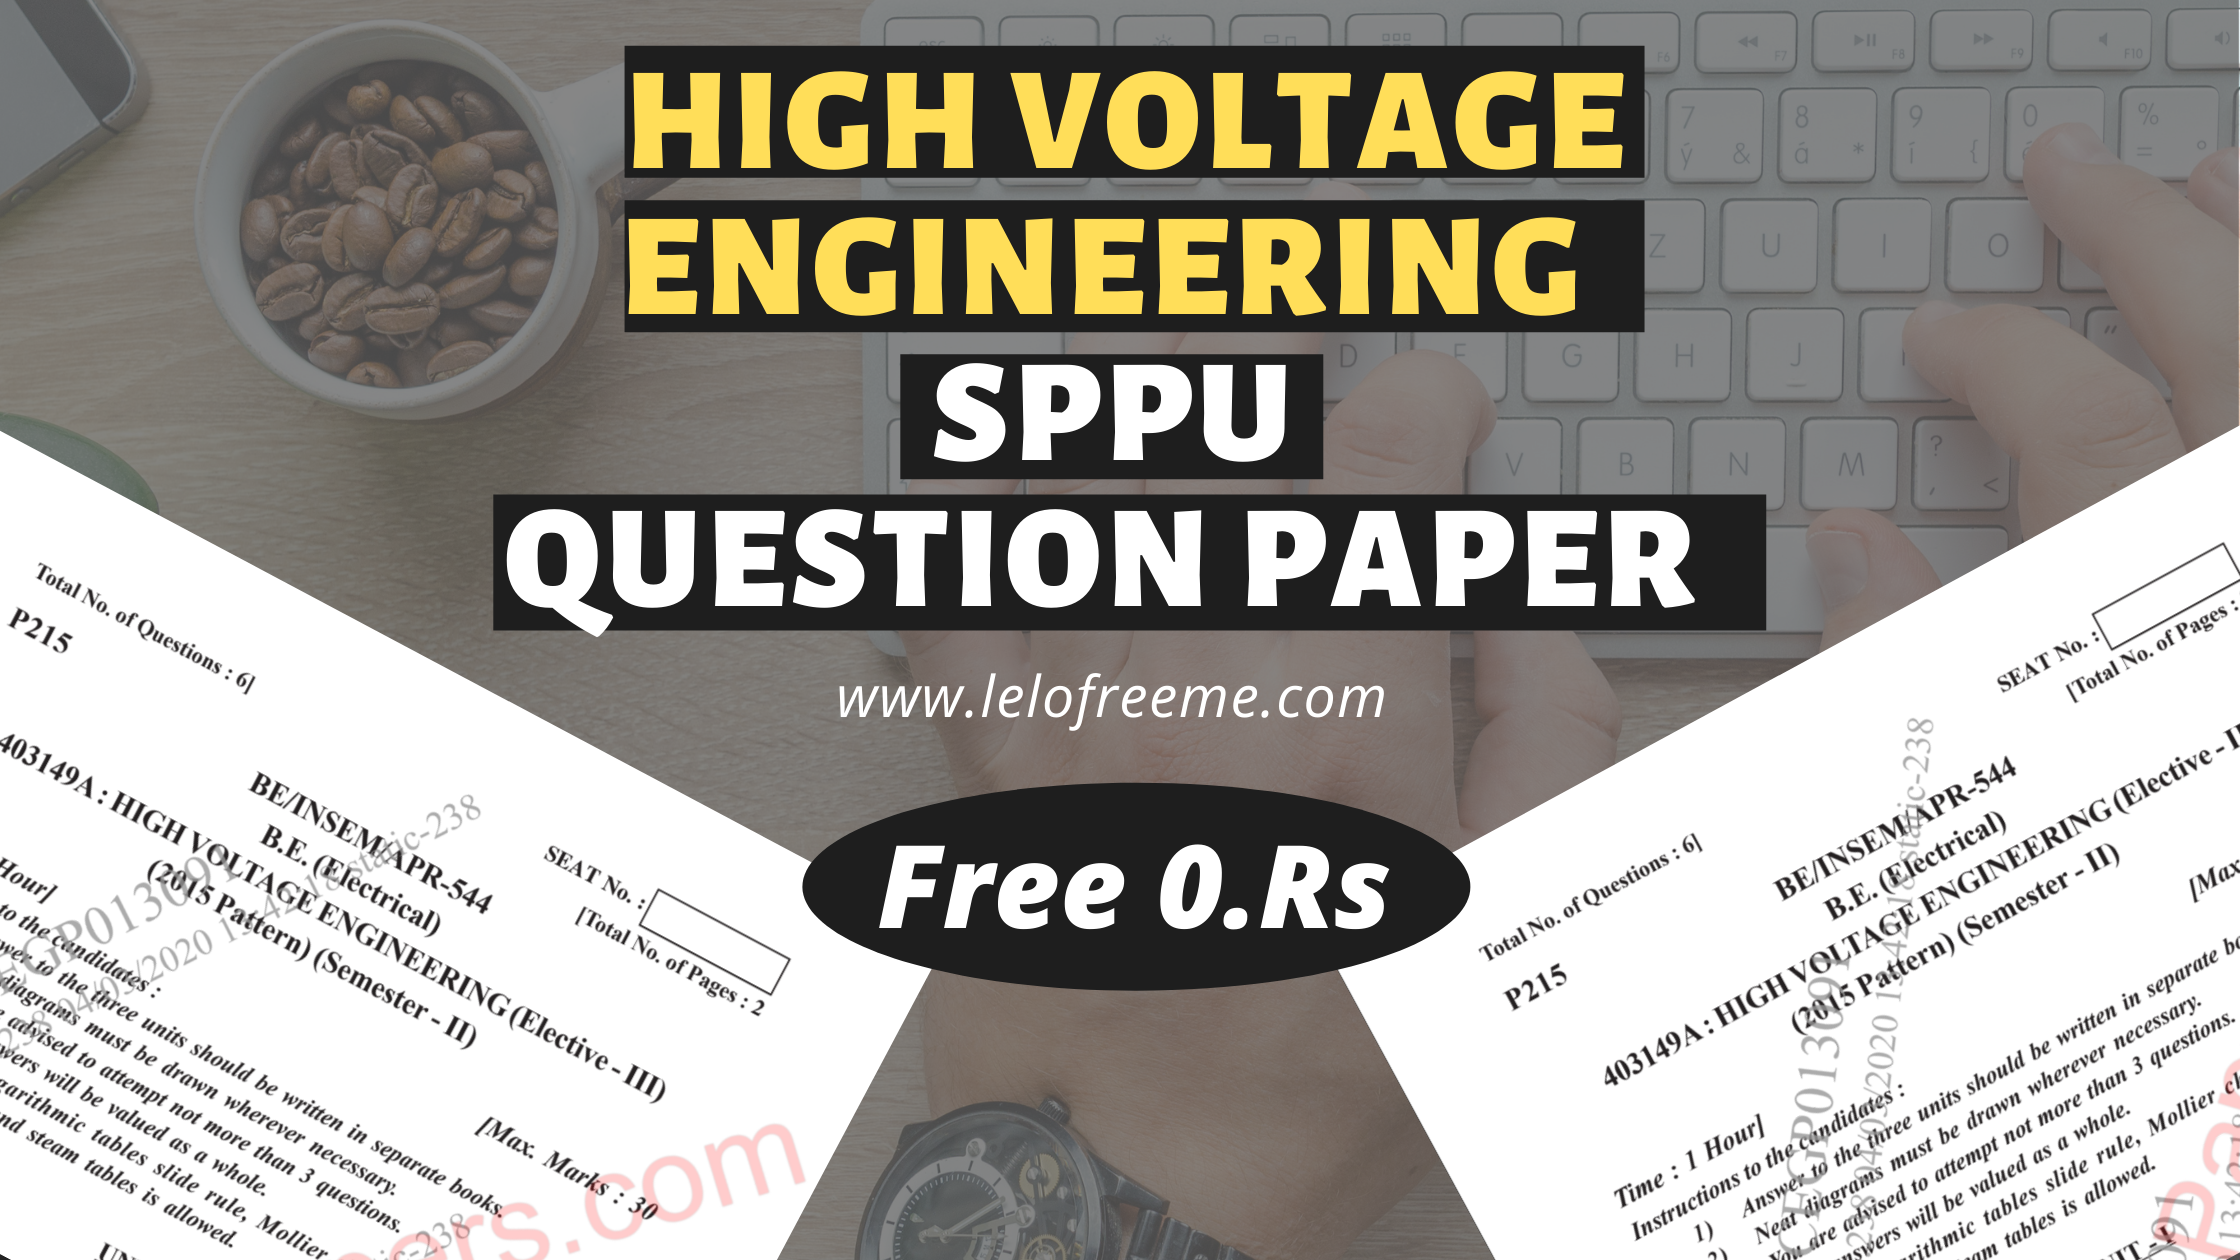 SPPU HIGH VOLTAGE ENGINEERING Question Paper (403149A) Download